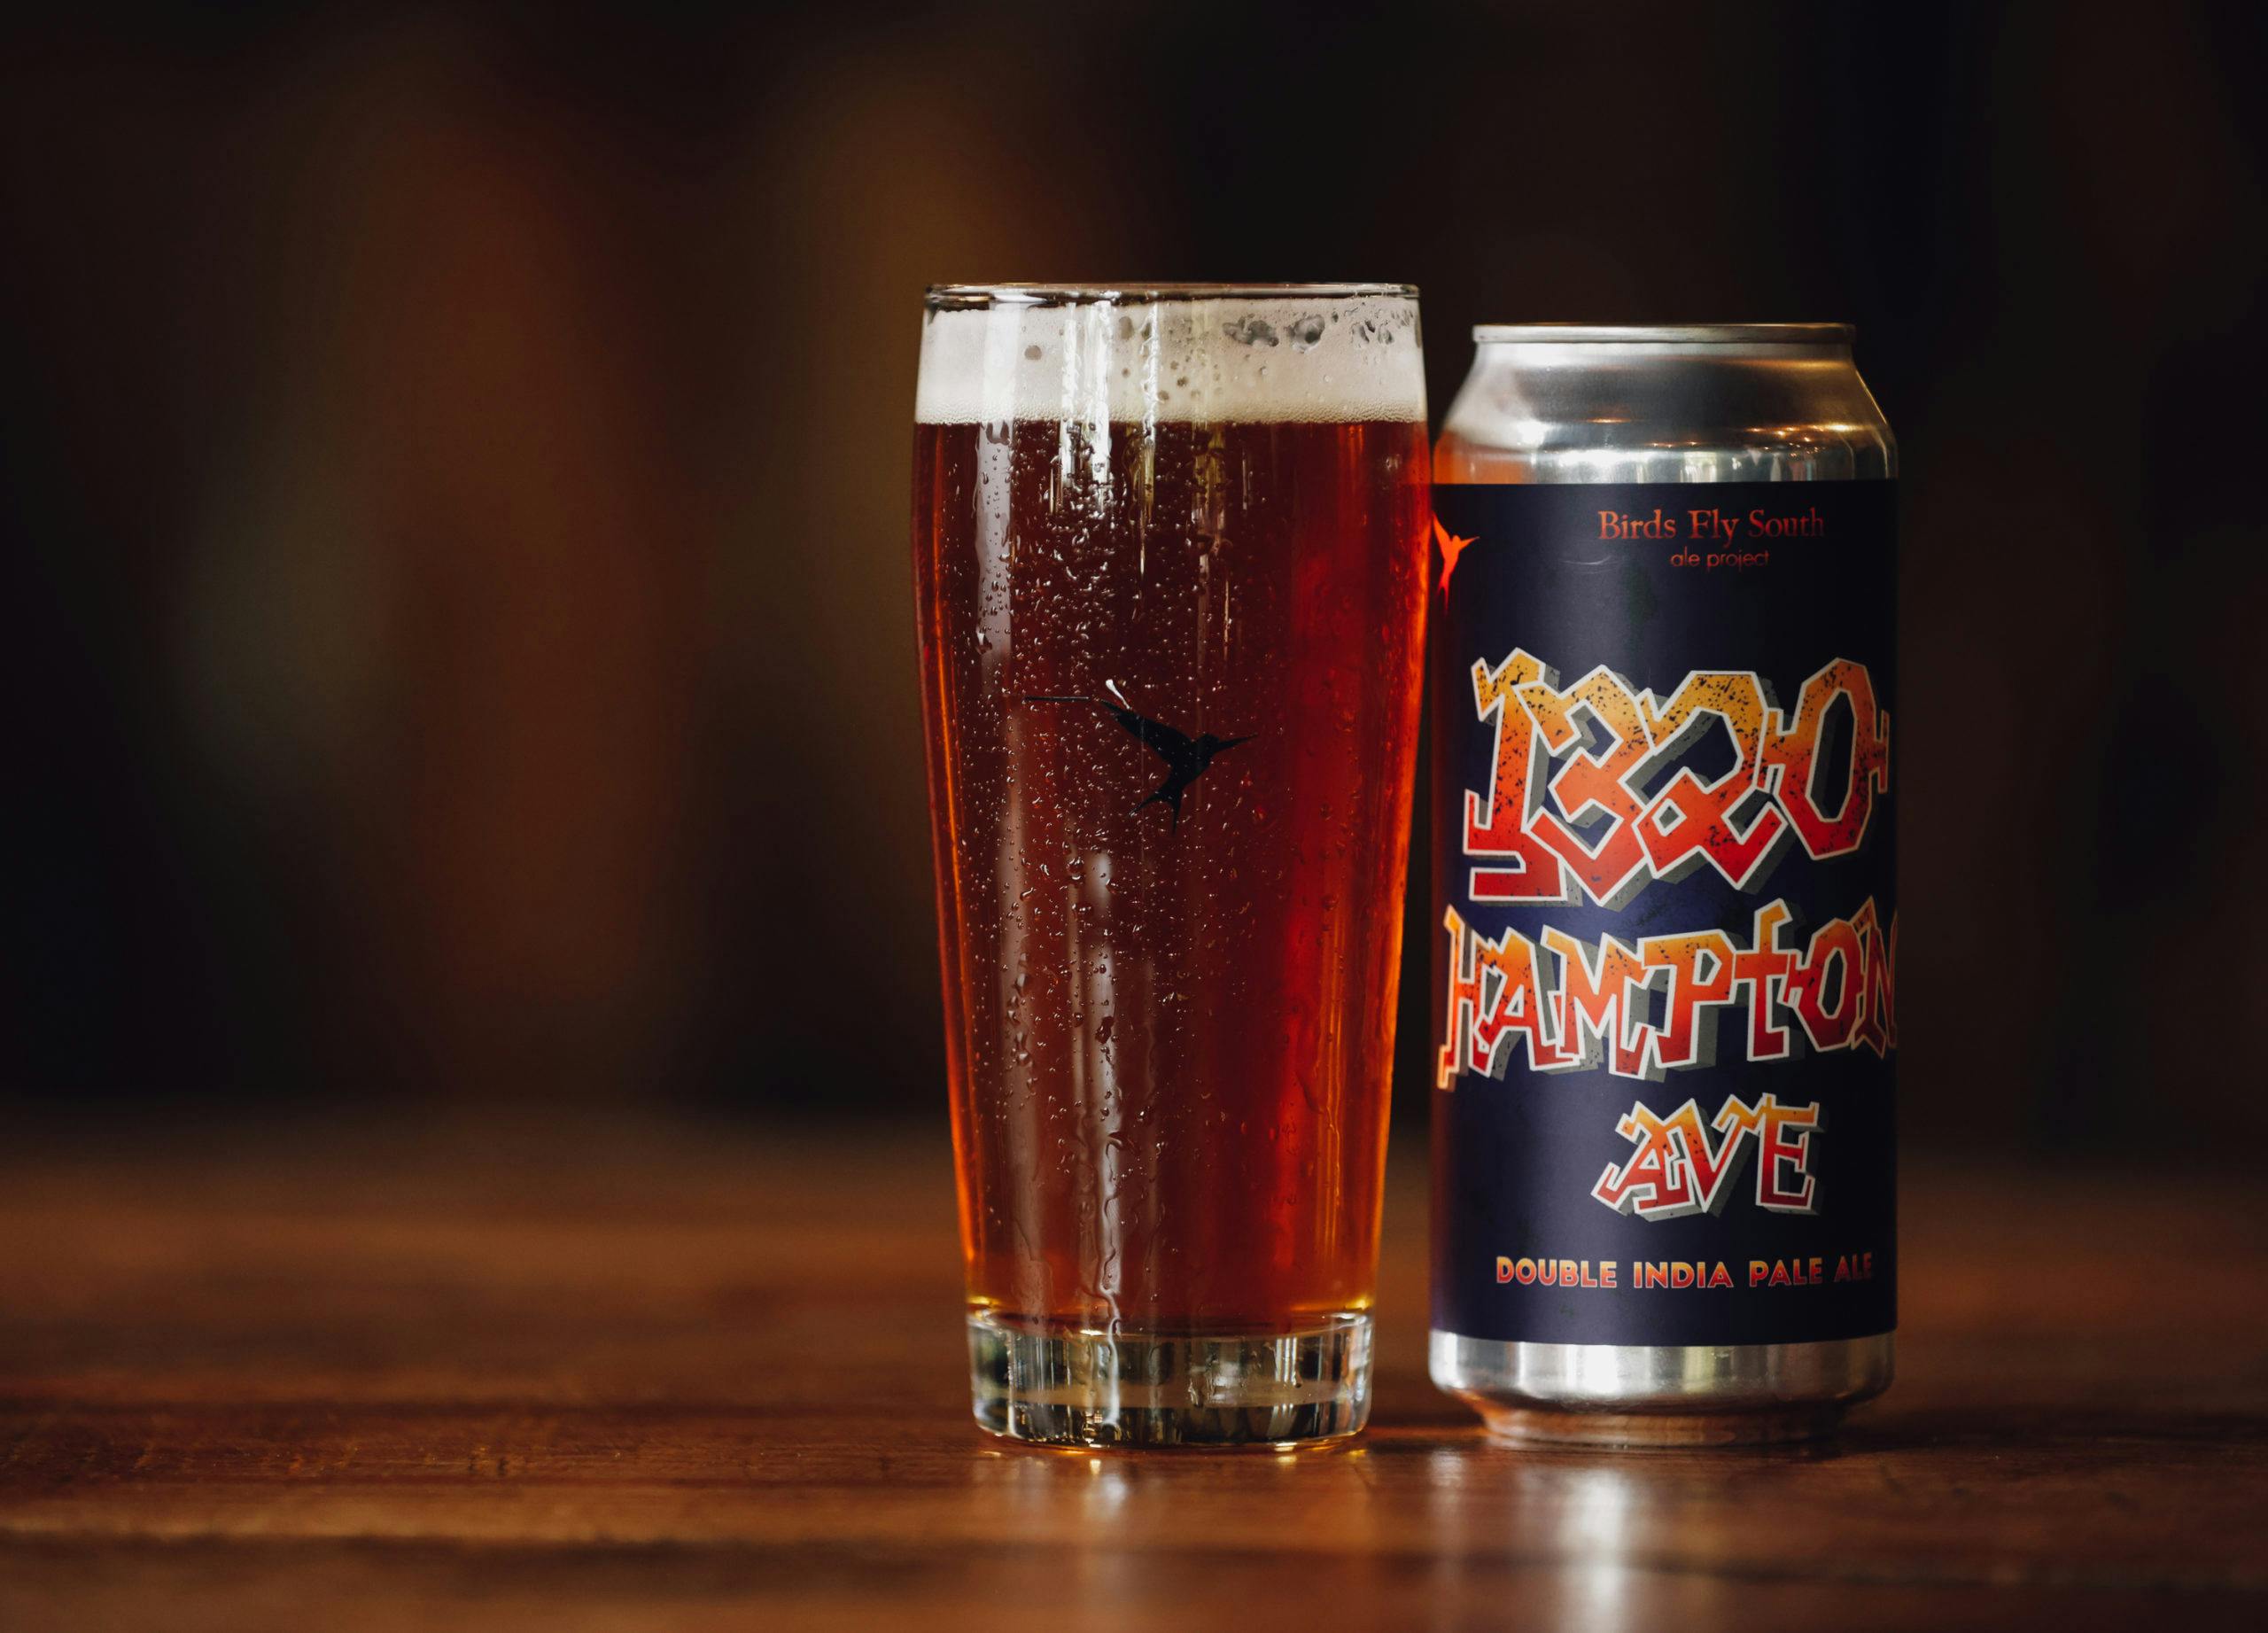 1320 Double IPA by Birds Fly South